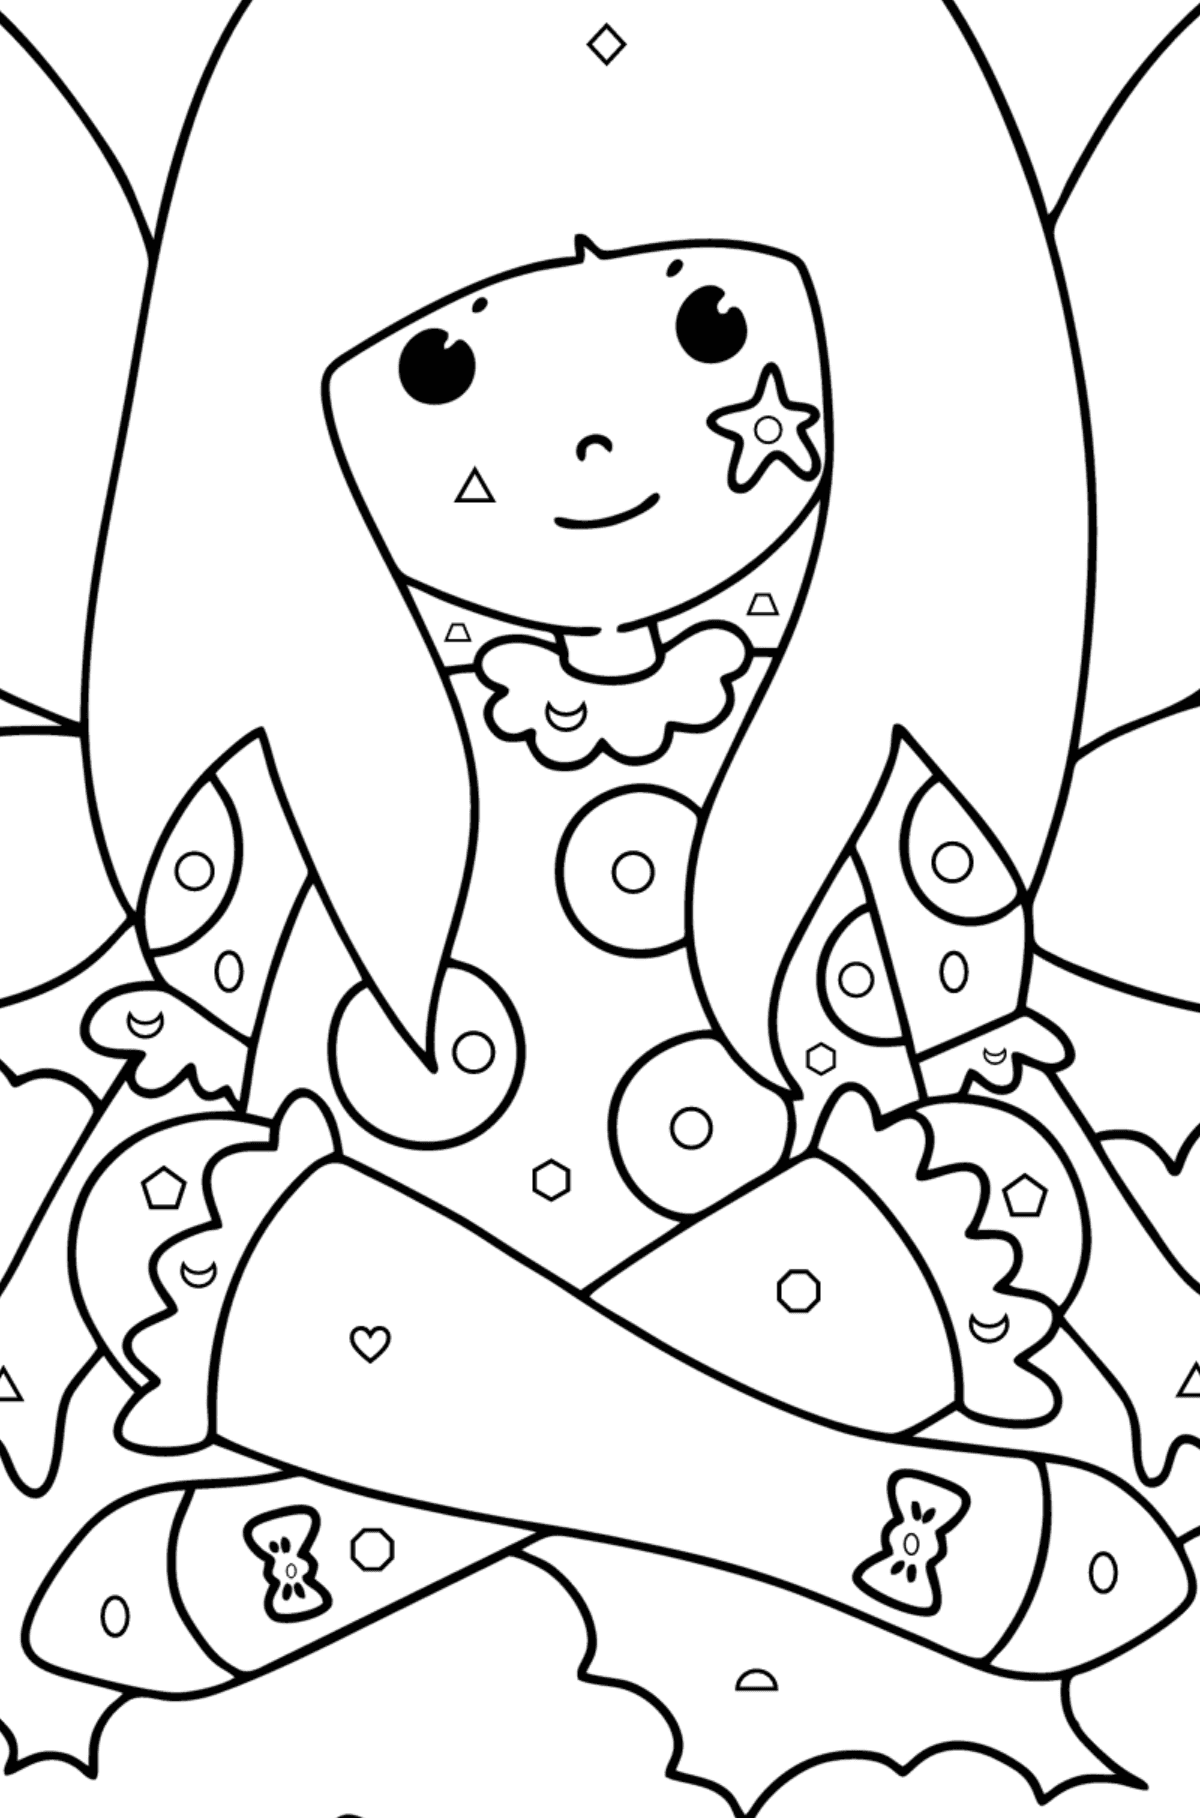 Cartoon fairy coloring page - Coloring by Geometric Shapes for Kids